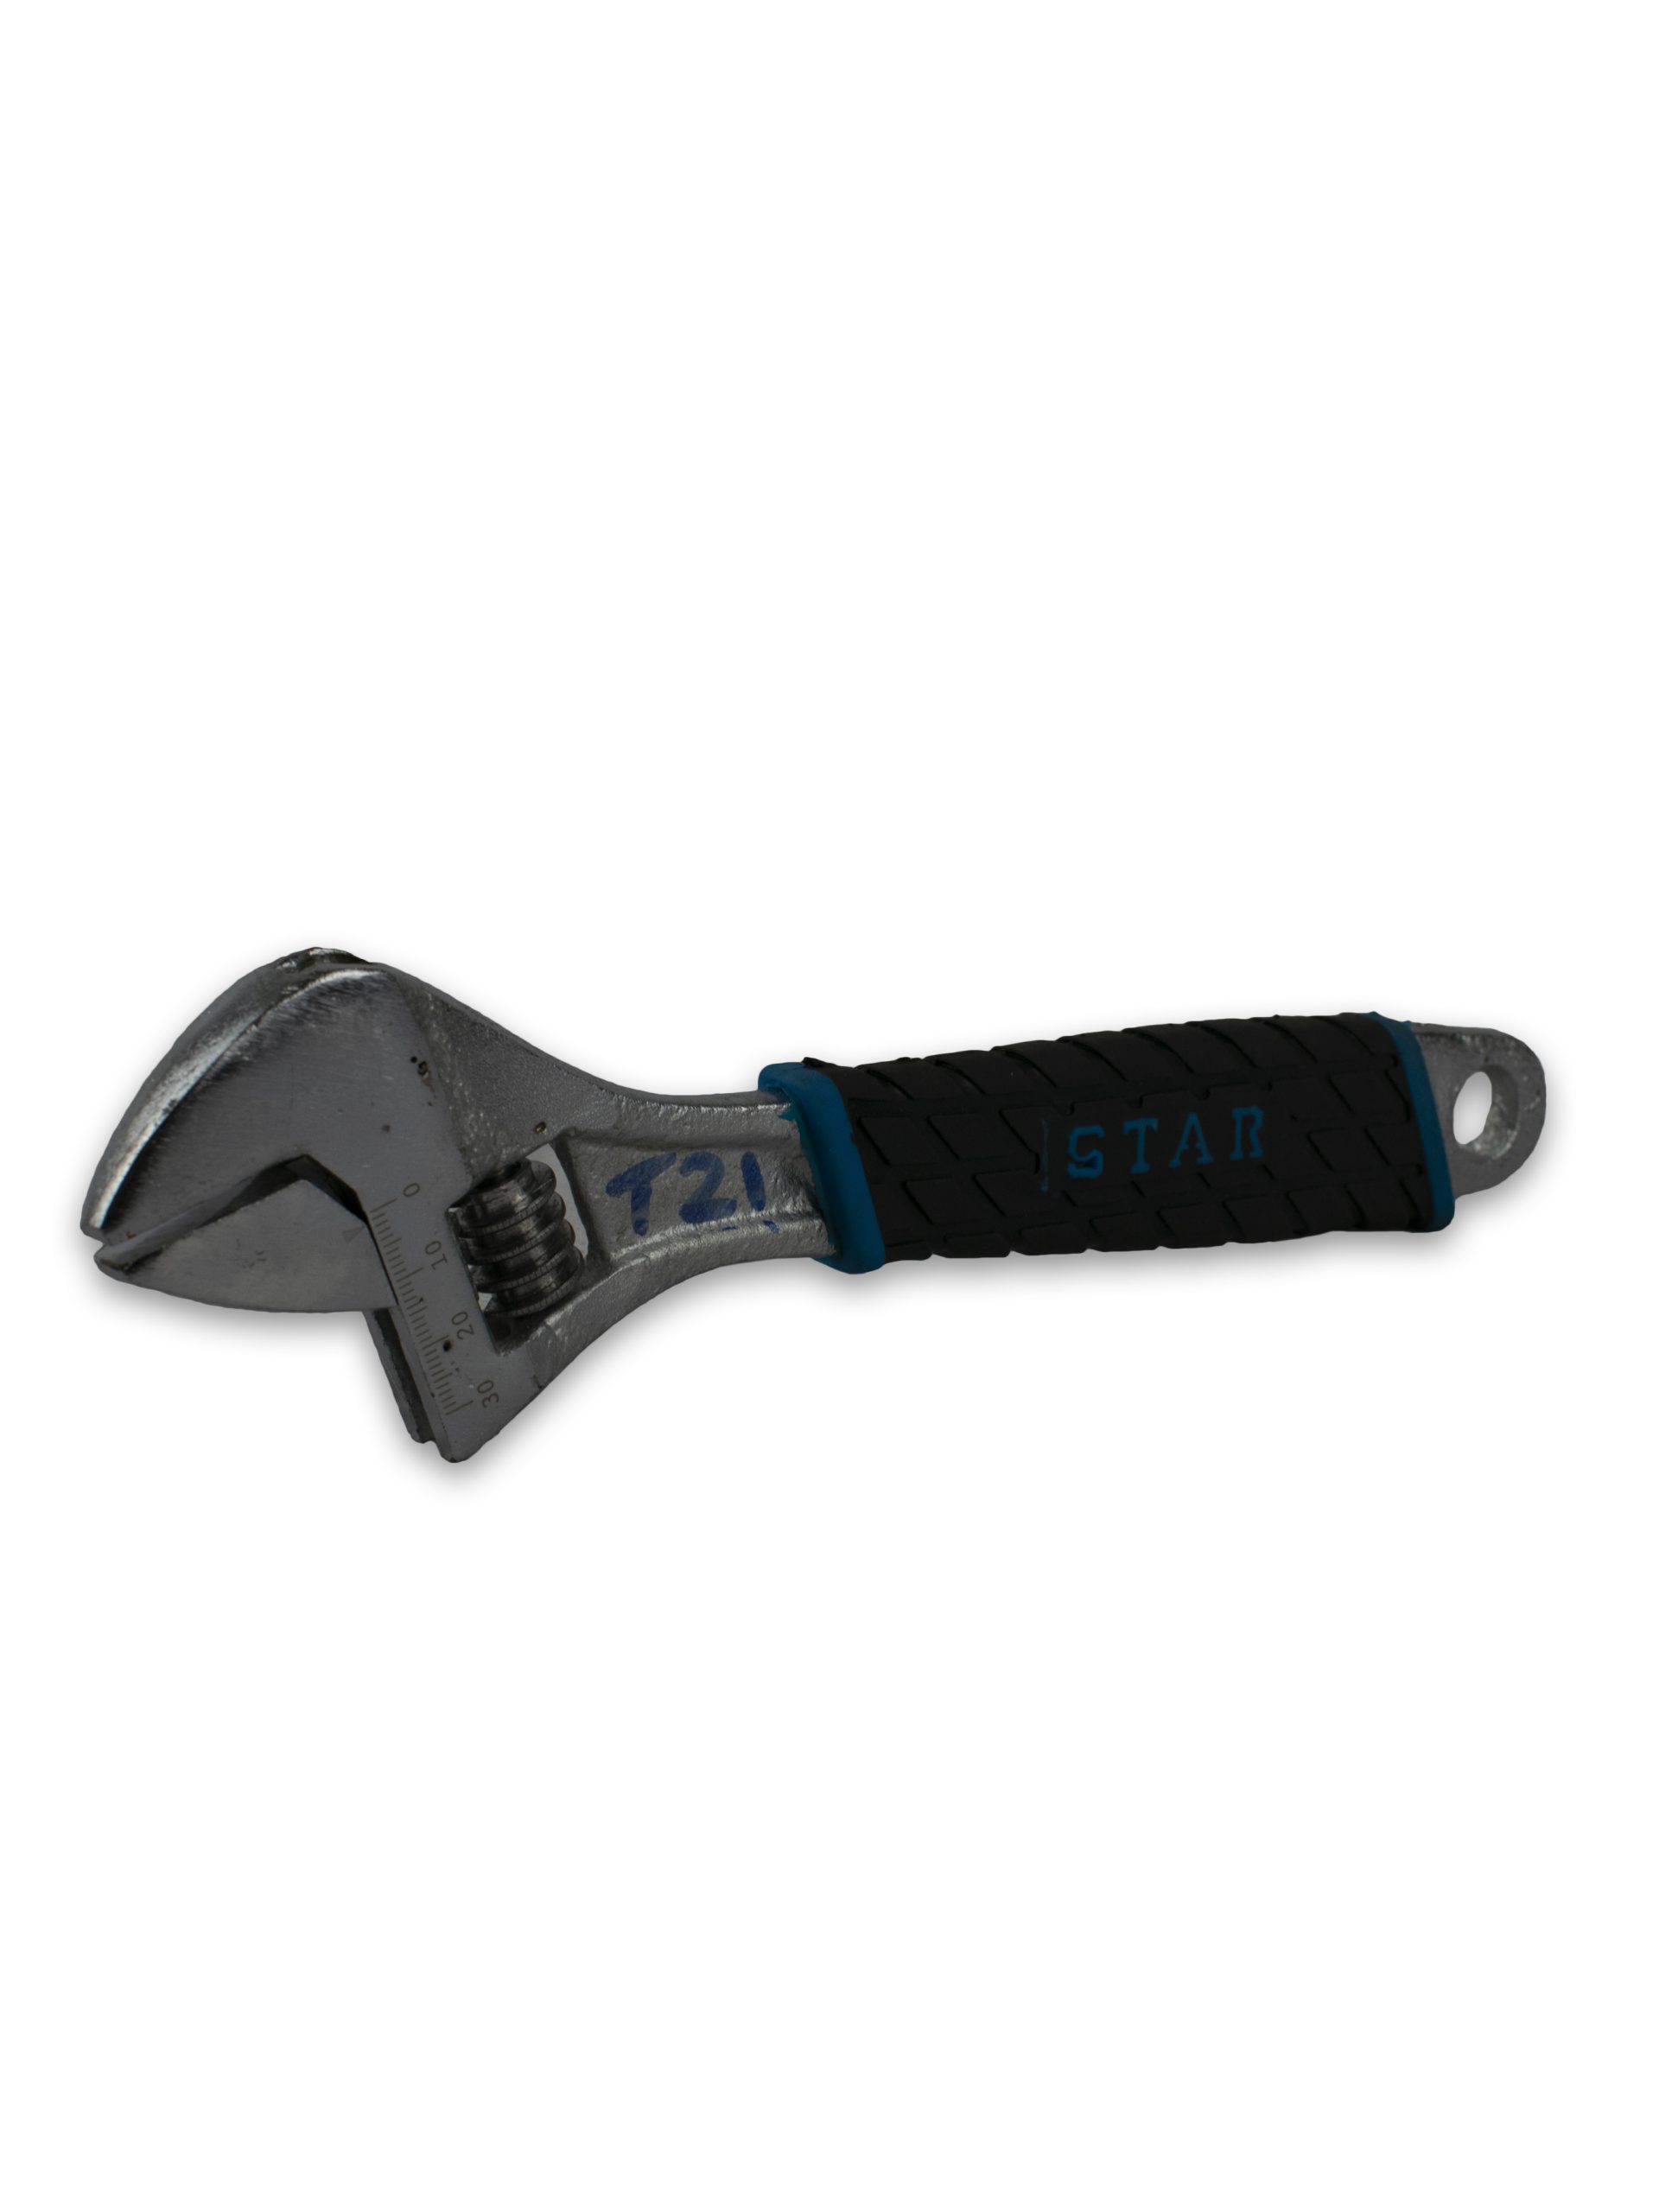 ADJUSTABLE SPANNER 10 Inches